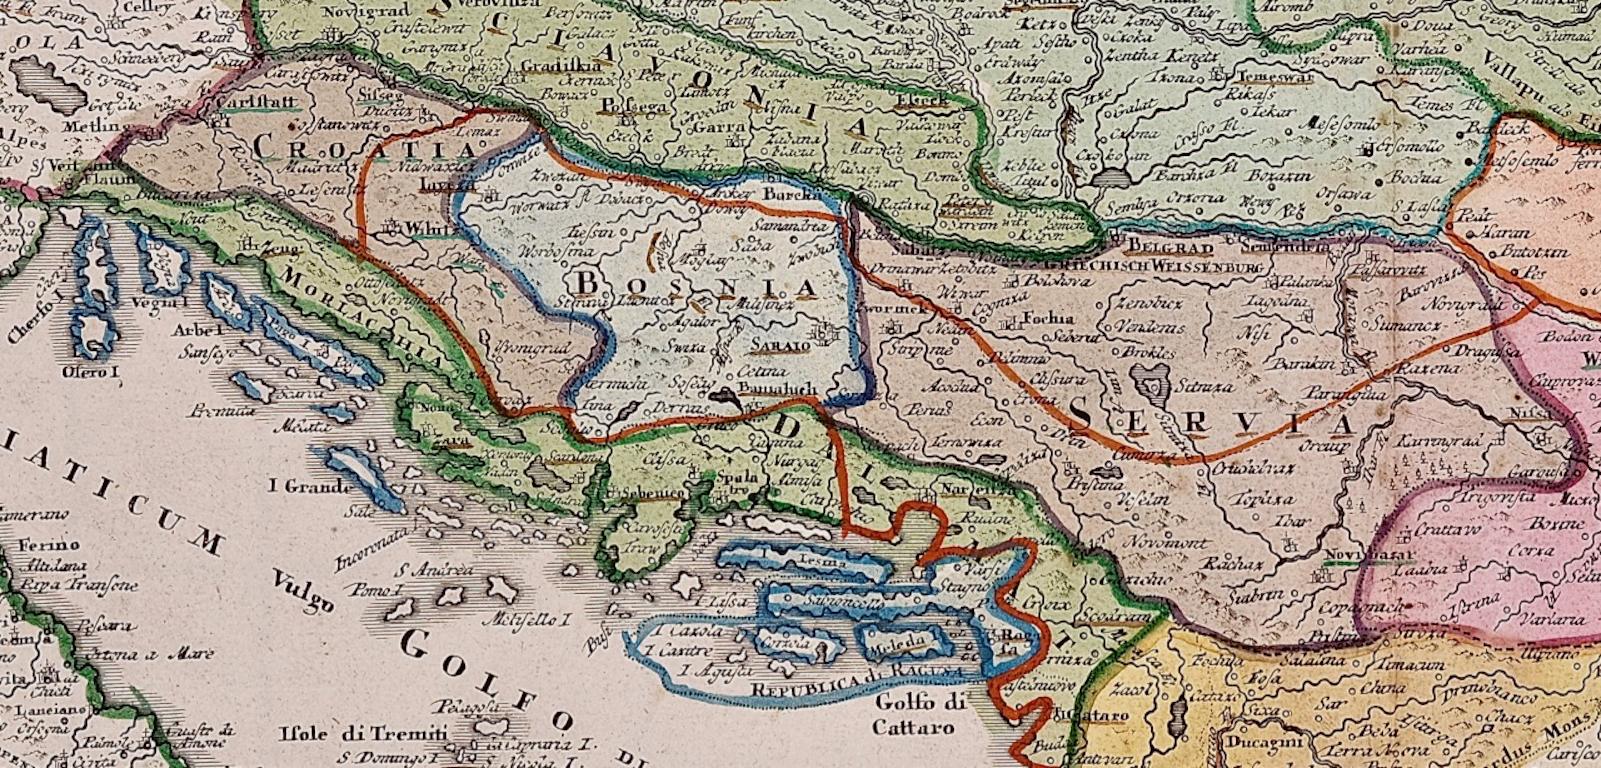 Danube River, Italy, Greece and Croatia: A Hand-colored 18th C. Homann Map  For Sale 3